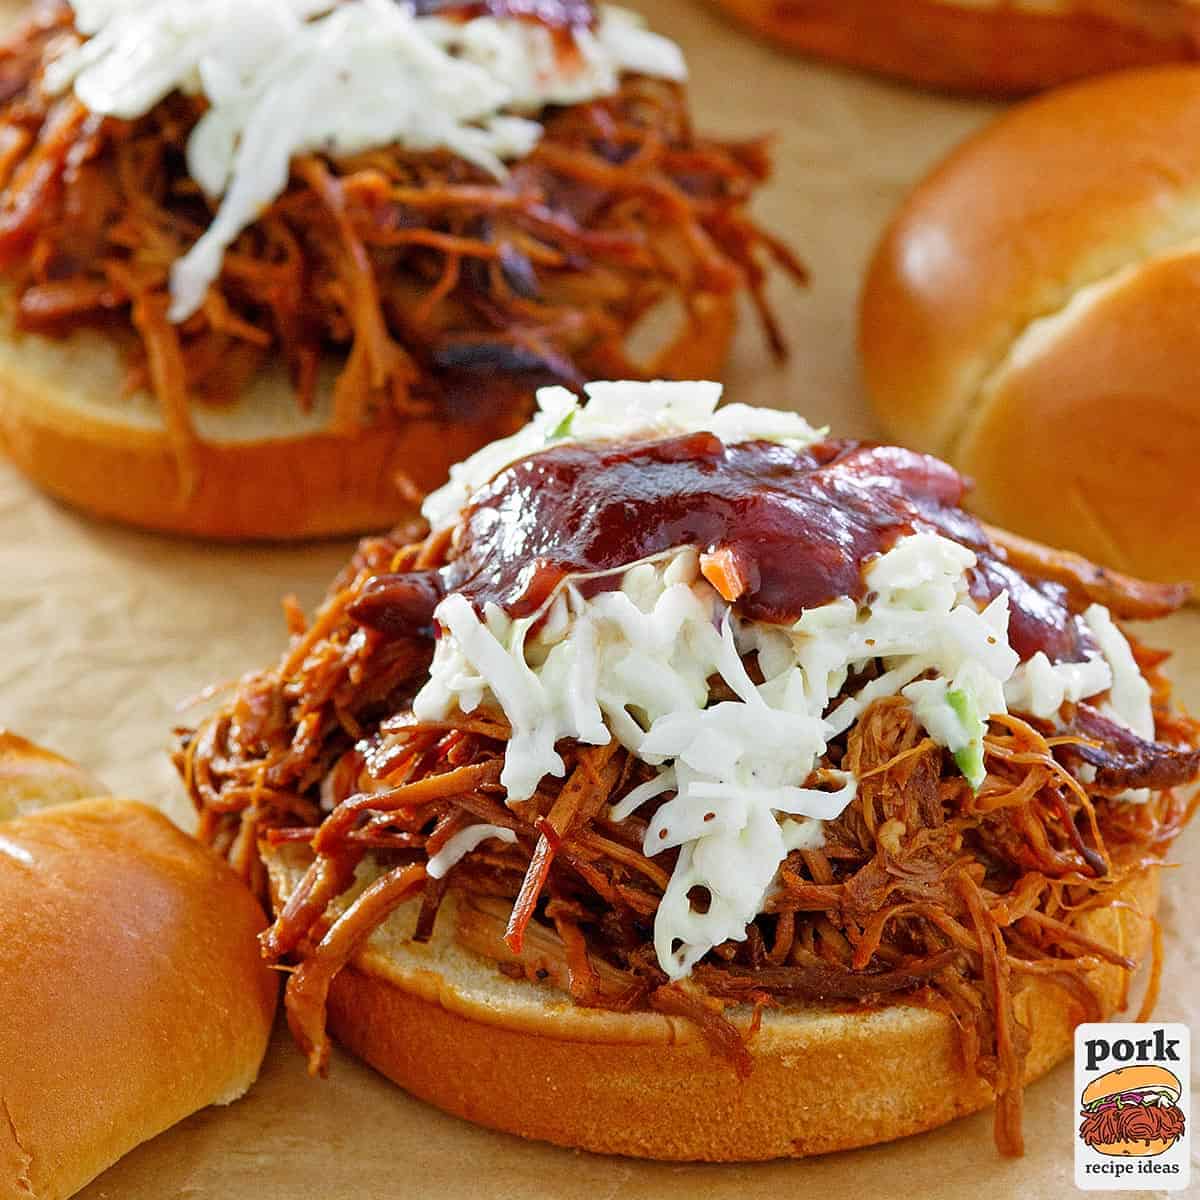 a pulled pork sandwich with coleslaw and extra bbq sauce